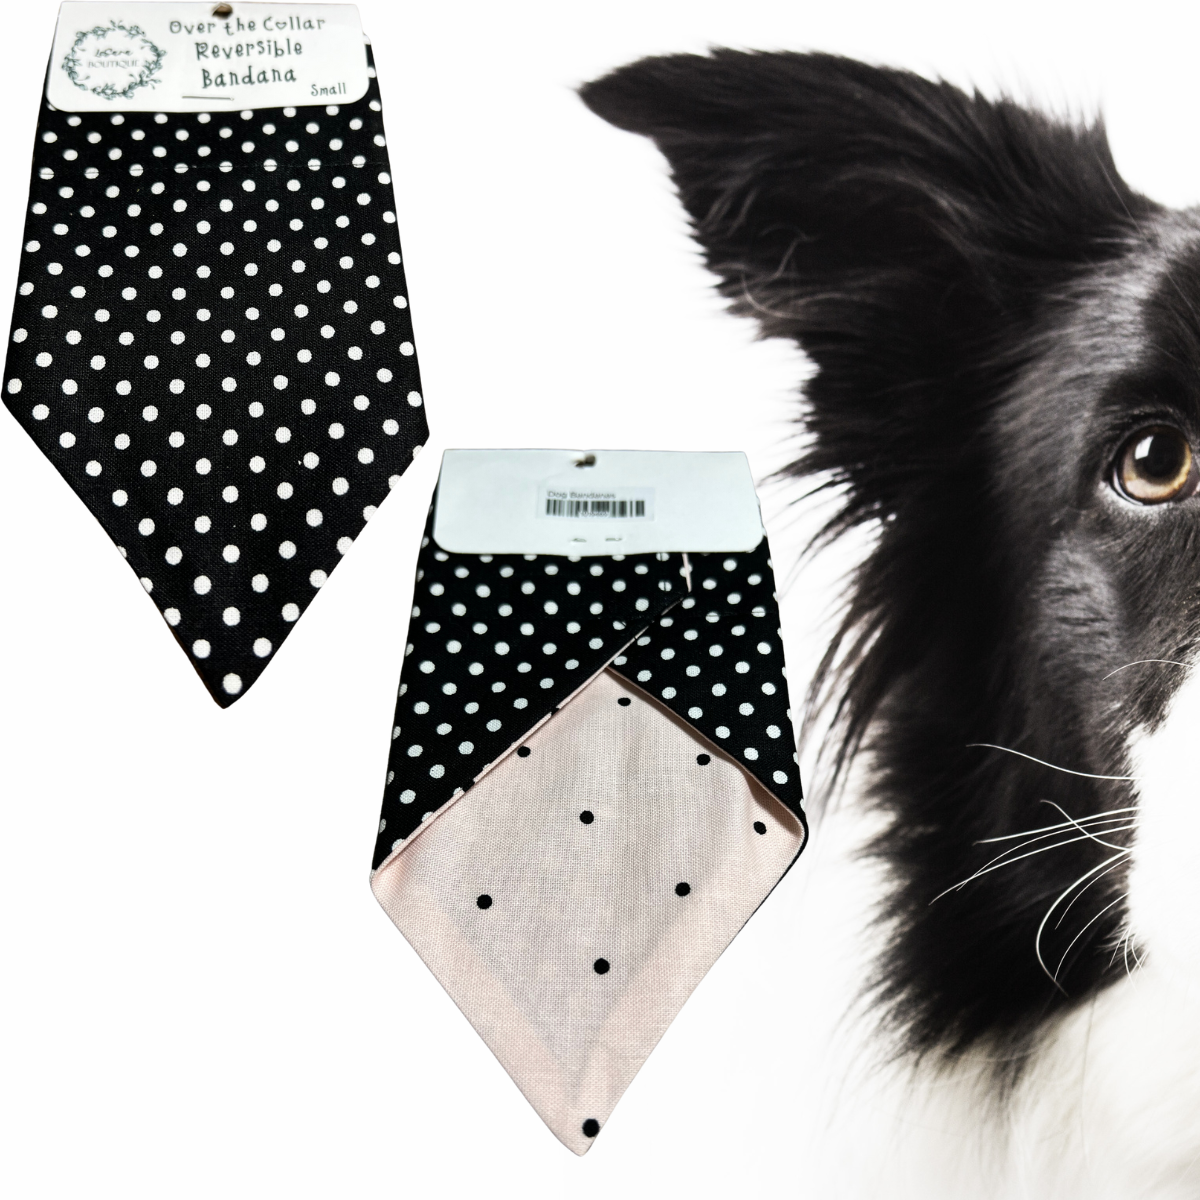 Small Reversible Over-the-Collar Dog Bandana (8" Wide by 6" Long)